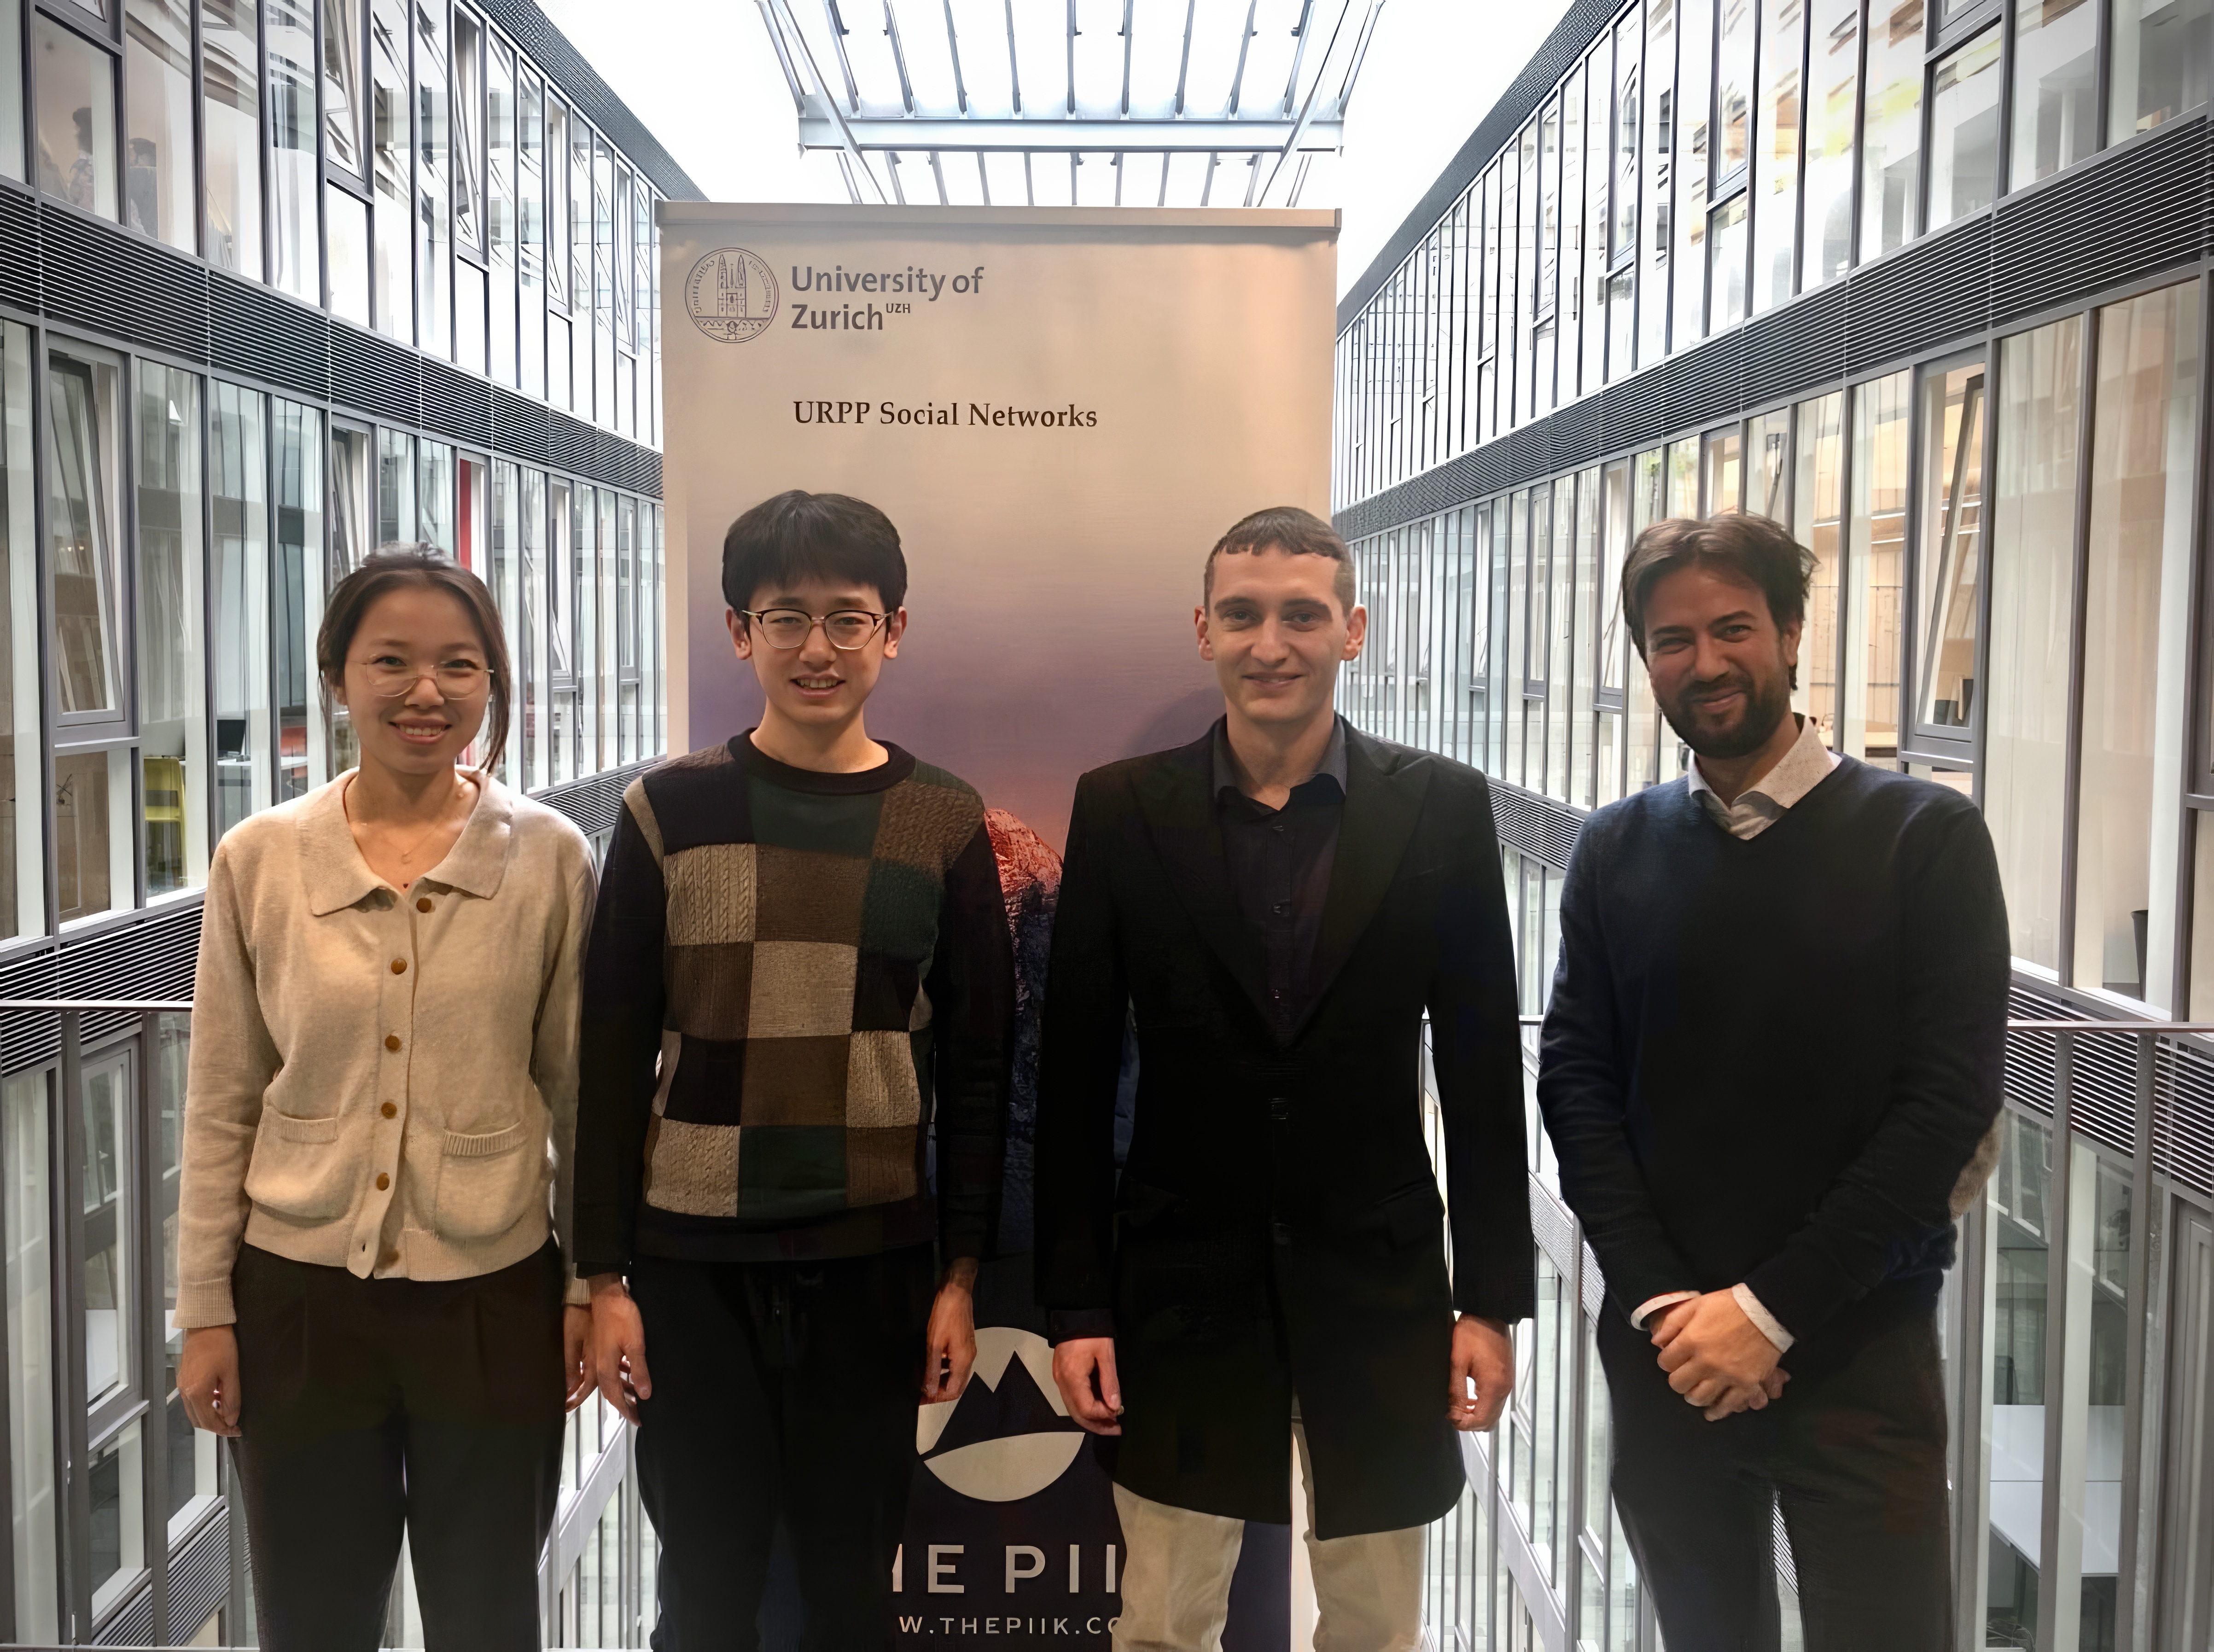 Mngwei Wang and team at University of Zurich 